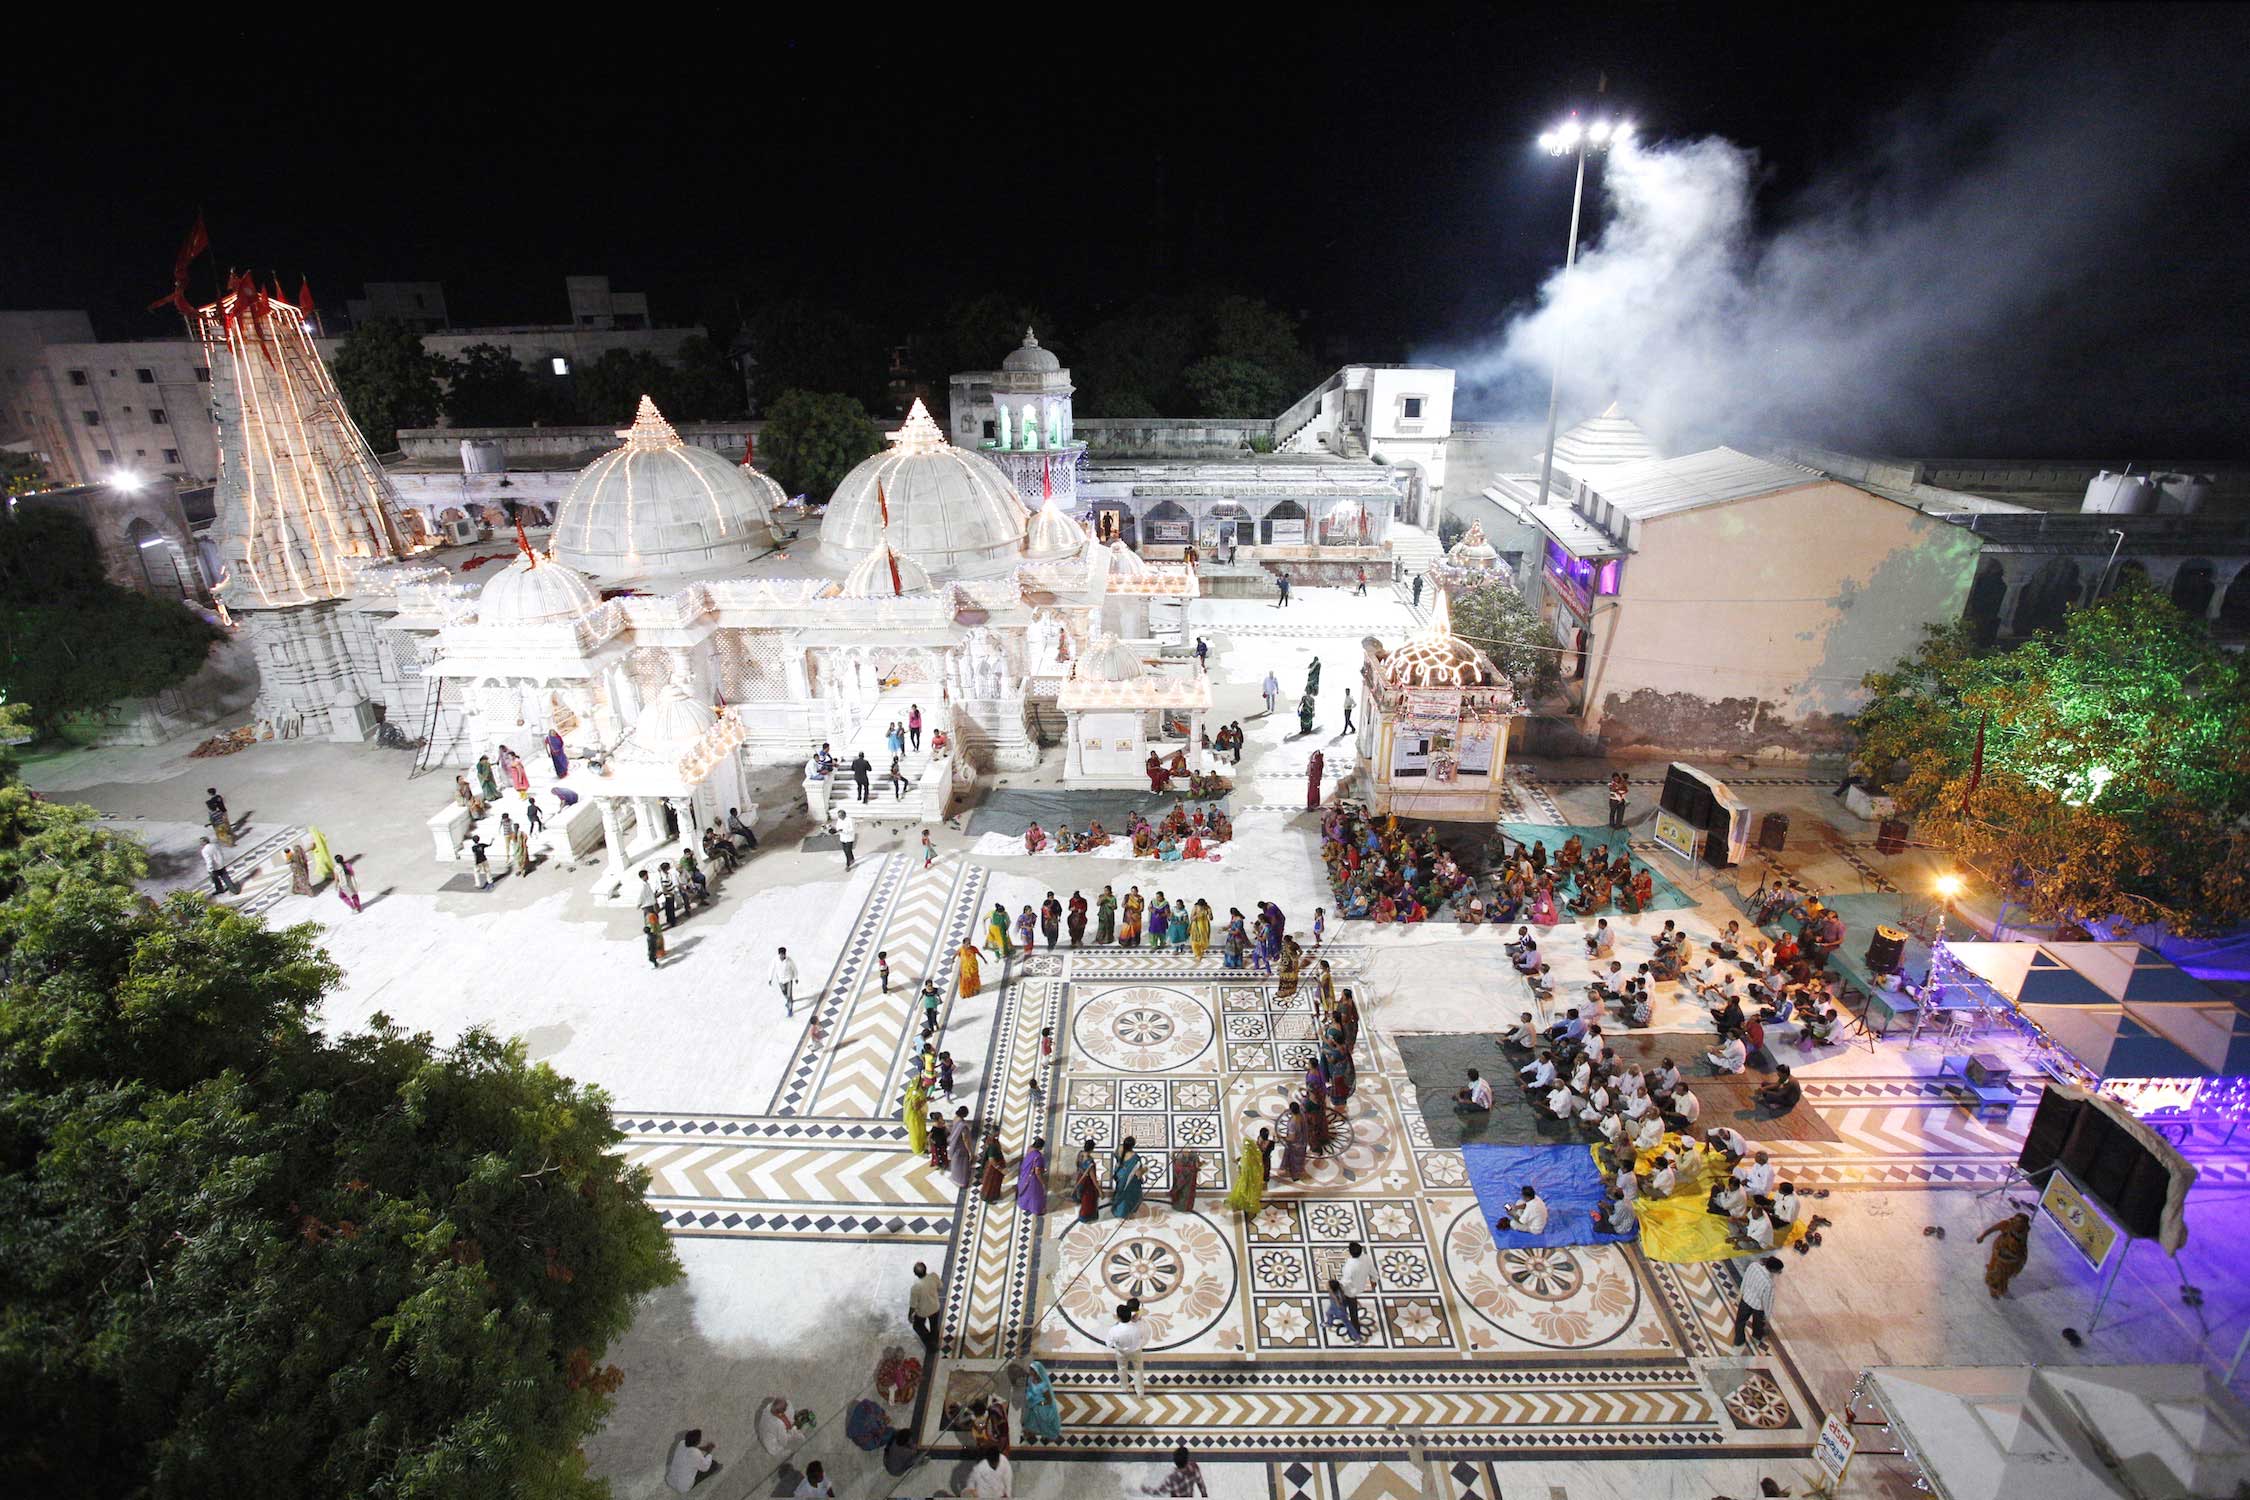 This temple in the north of Gujarat is entirely unknown. On the eighth day of Navratri,  women perform the ritual circle dance as the men are watching. In the background pilgrims are making offerings in the temple, that is decorated for the celebration with thousands of LED lights. On the upper right corner holy smoke fills the temple area, from a fire-temple in which Ayurvedic ingredients are burnt in a huge lot.
                              After long negotiations with the local priests, we were allowed to climb the temple roof  and gates, of this ancient temple. This temple and celebration has never been documented to this extend before.